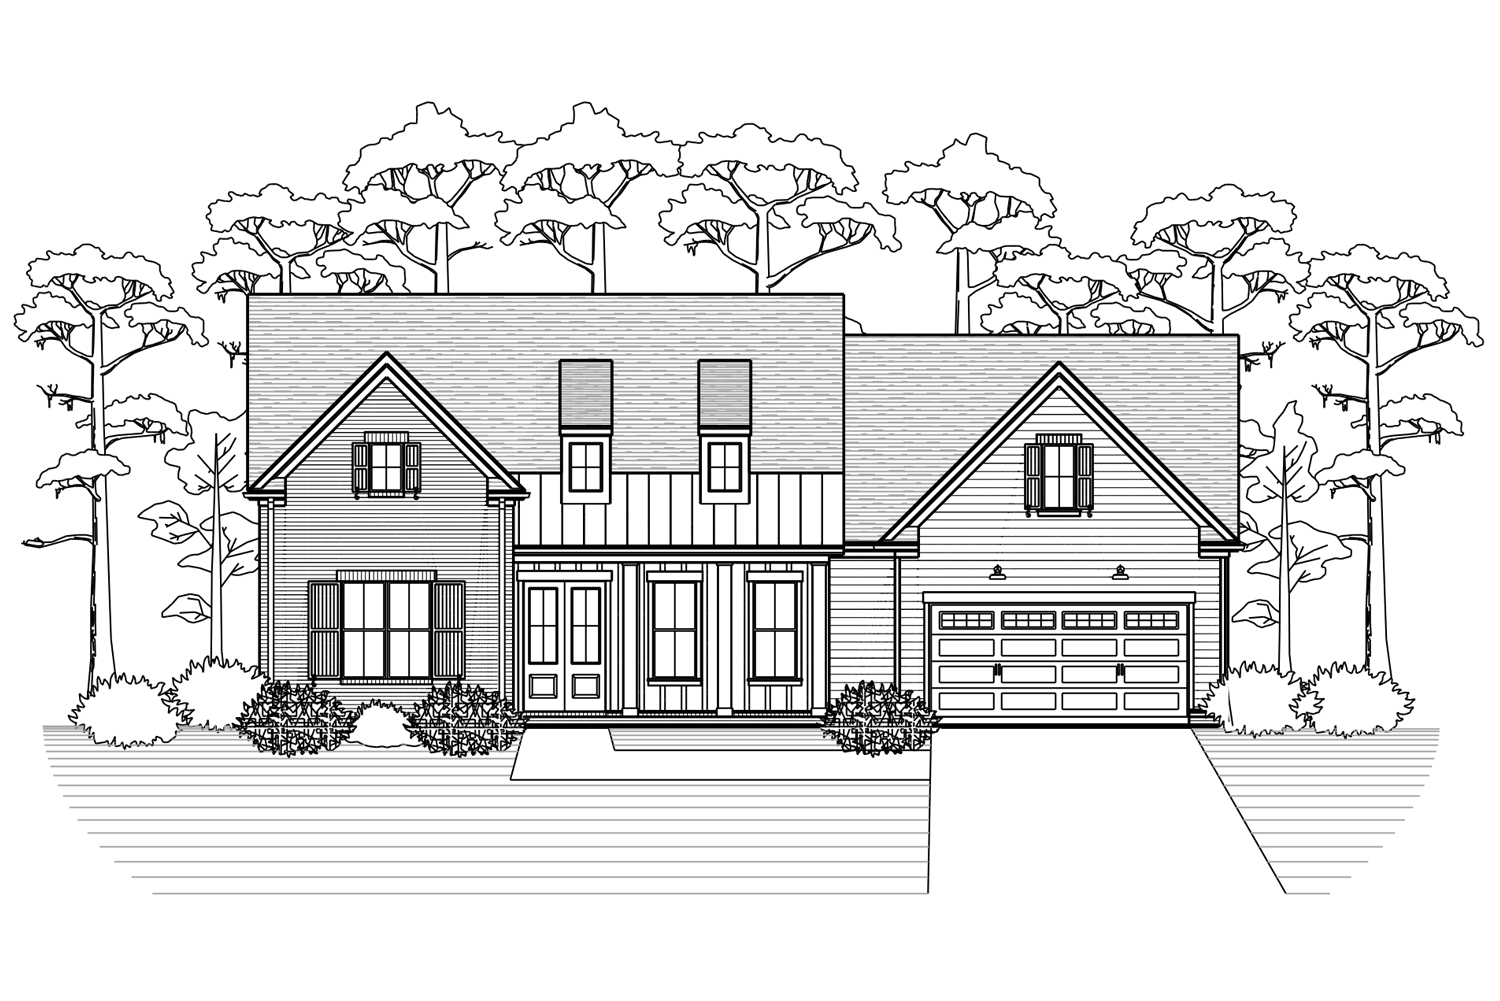 Greenfield Plan by OakRun homes in Tennessee